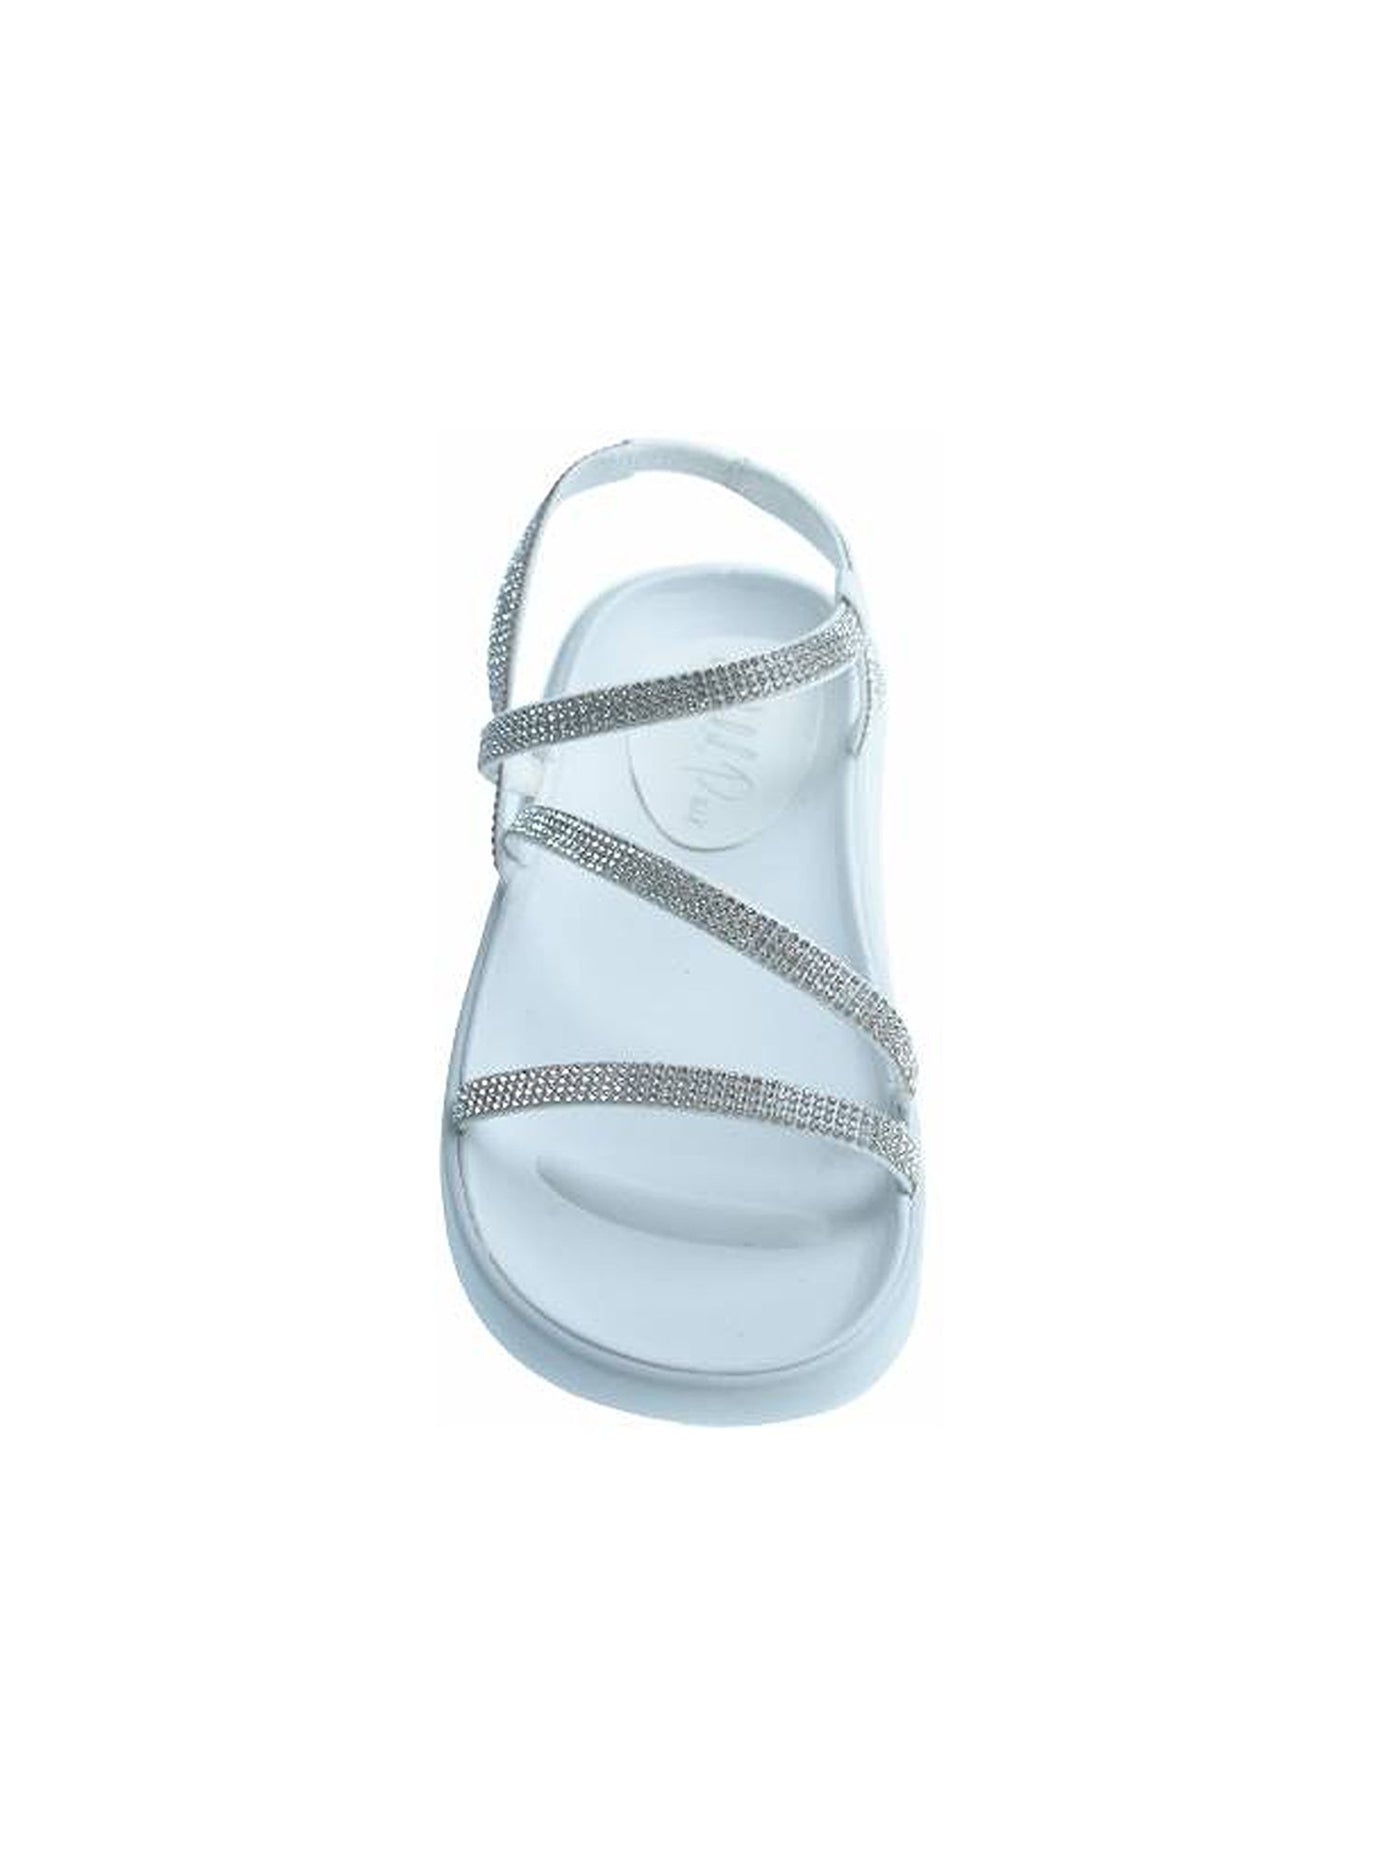 WILD PAIR Womens White Strappy Shimmering Ankle Strap Rhinestone Prudence Round Toe Slip On Sandals Shoes 7 M